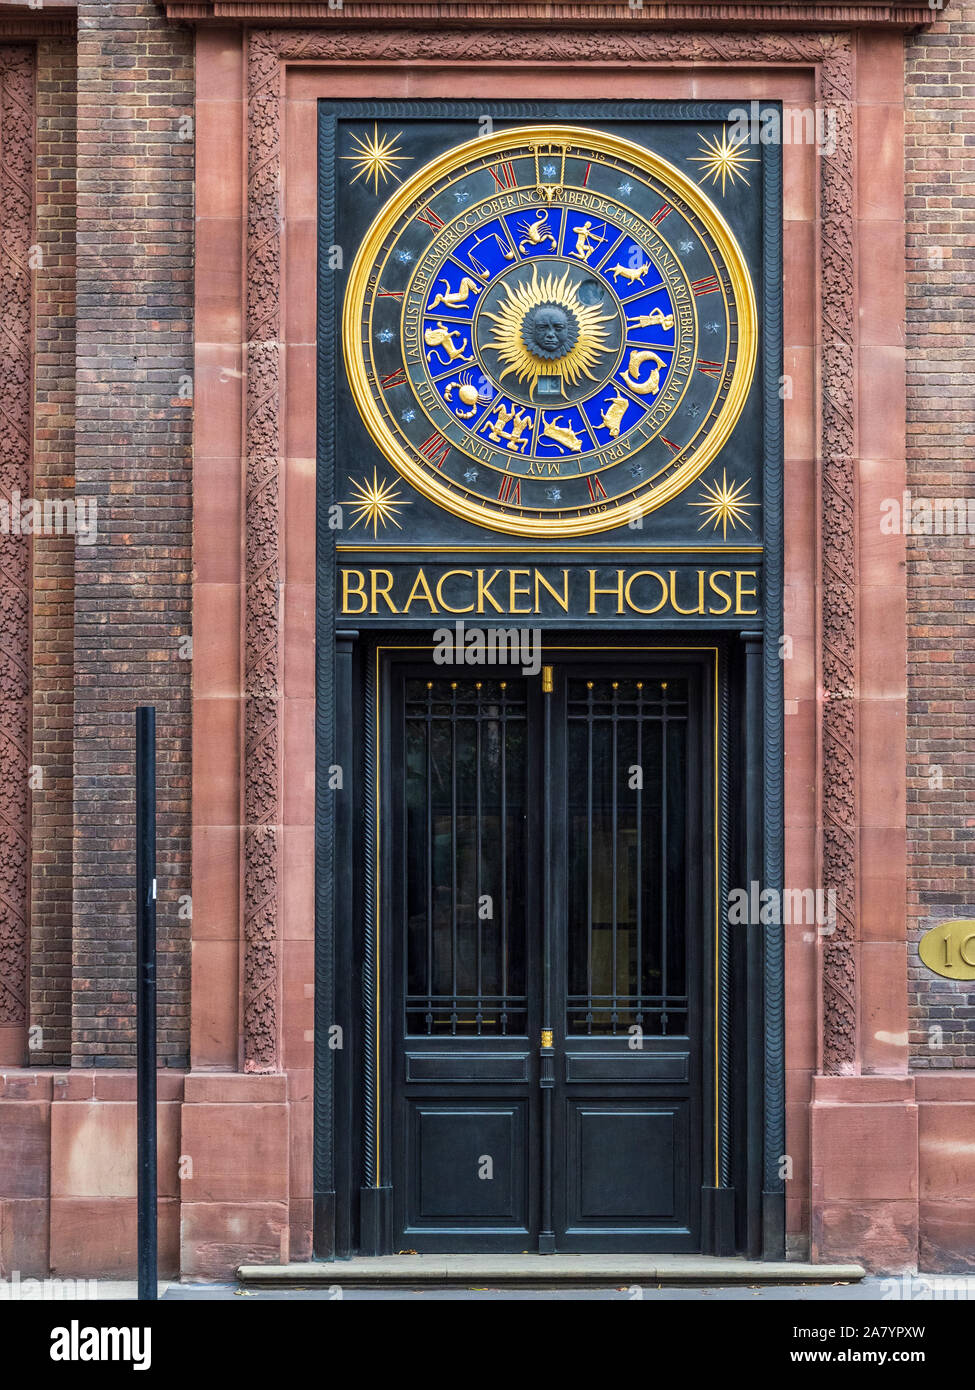 Astronomical clock on the FT Financial Times HQ at refurbished Bracken House in the City of London. Designers Frank Dobson and Philip Bentham Stock Photo